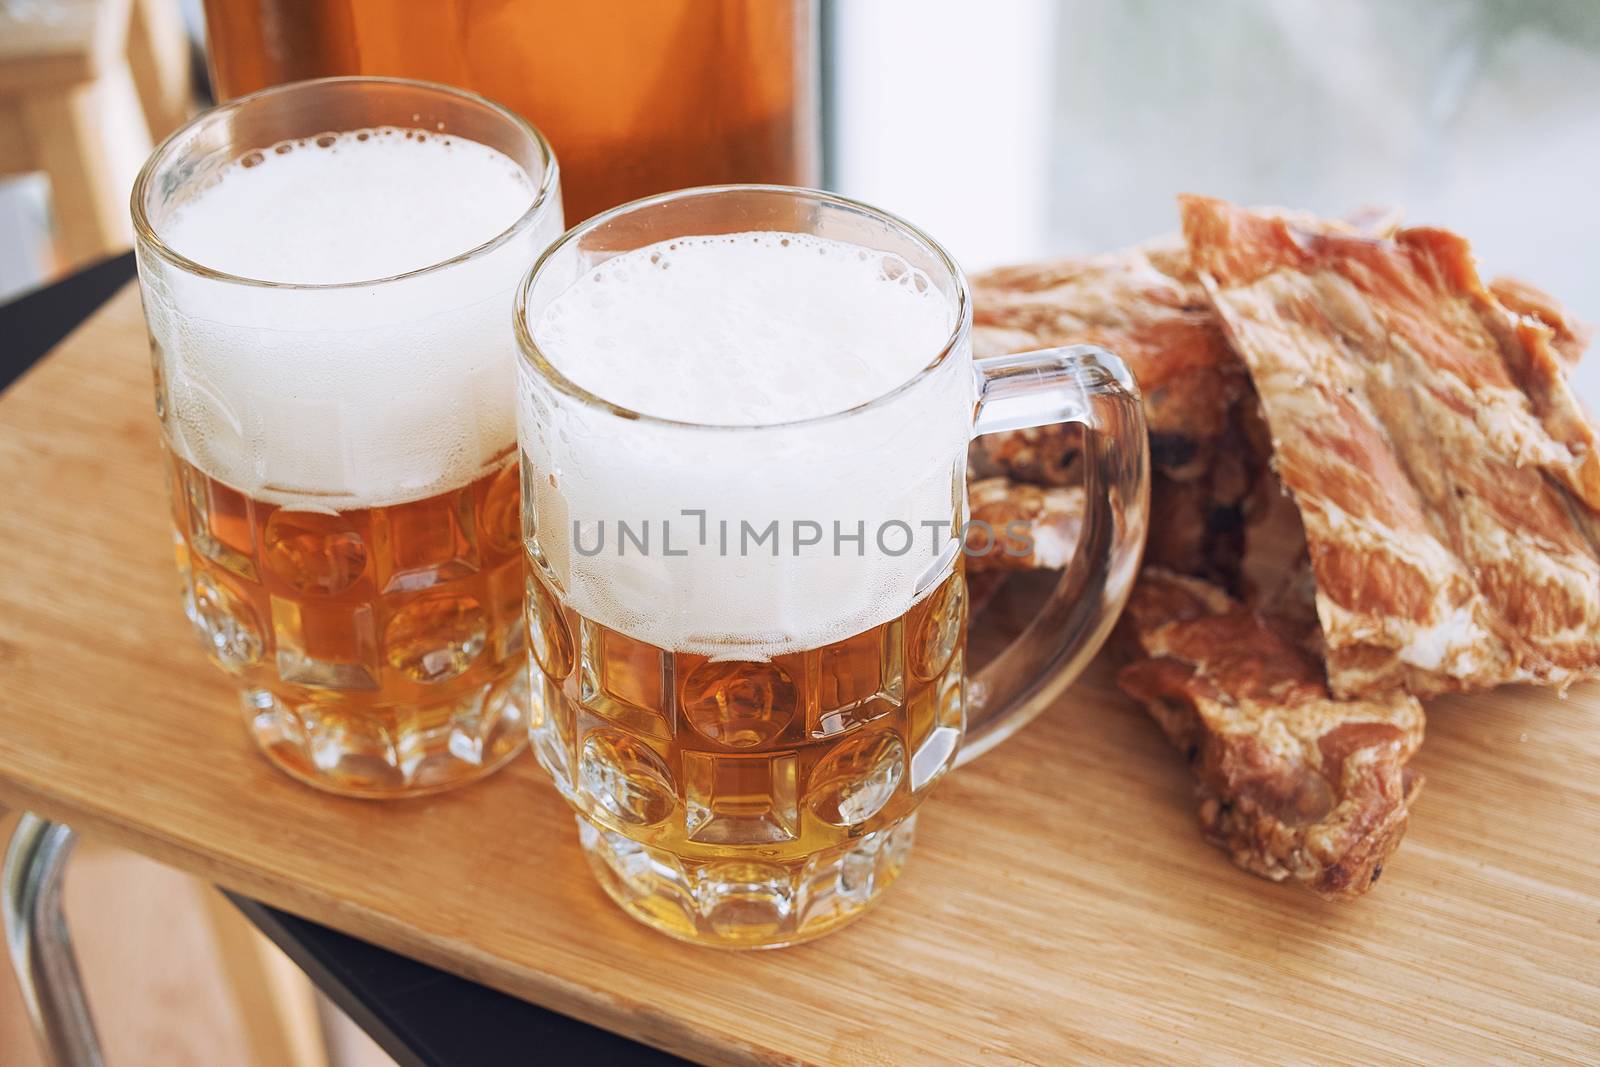 Barbecue pork ribs with beer. On wooden background.